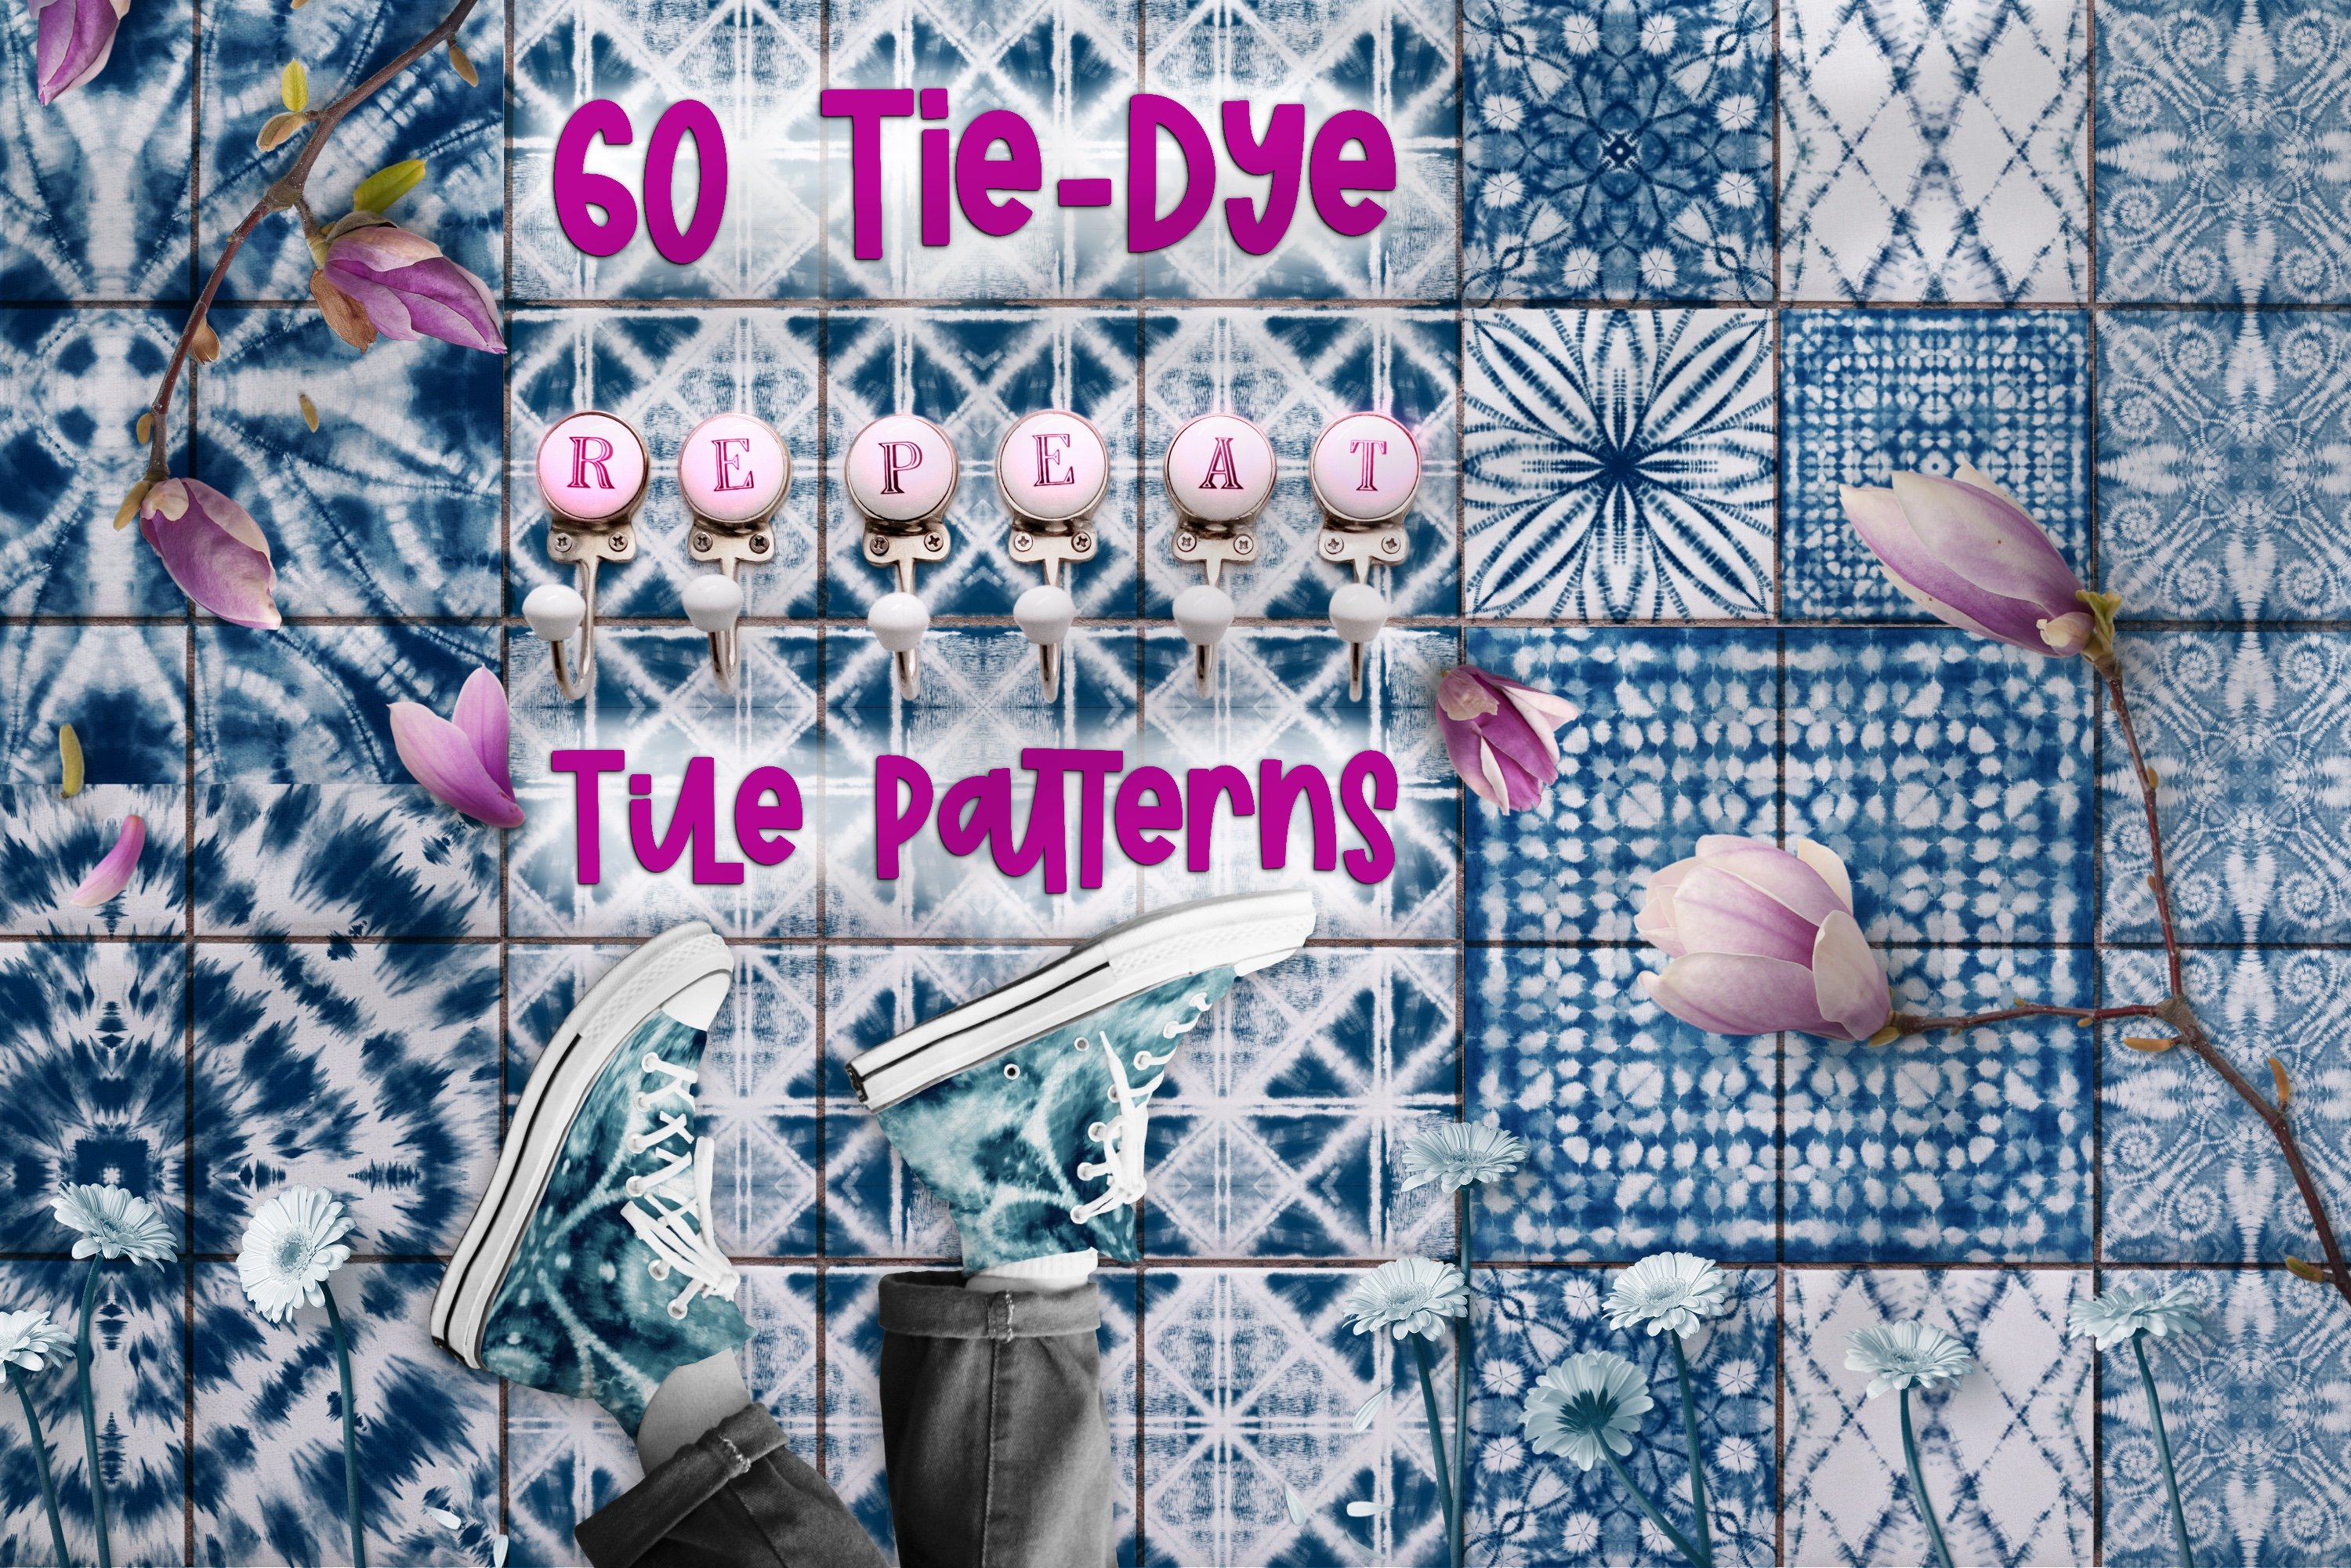 Tie Dye Repeat Tile Patterns cover image.